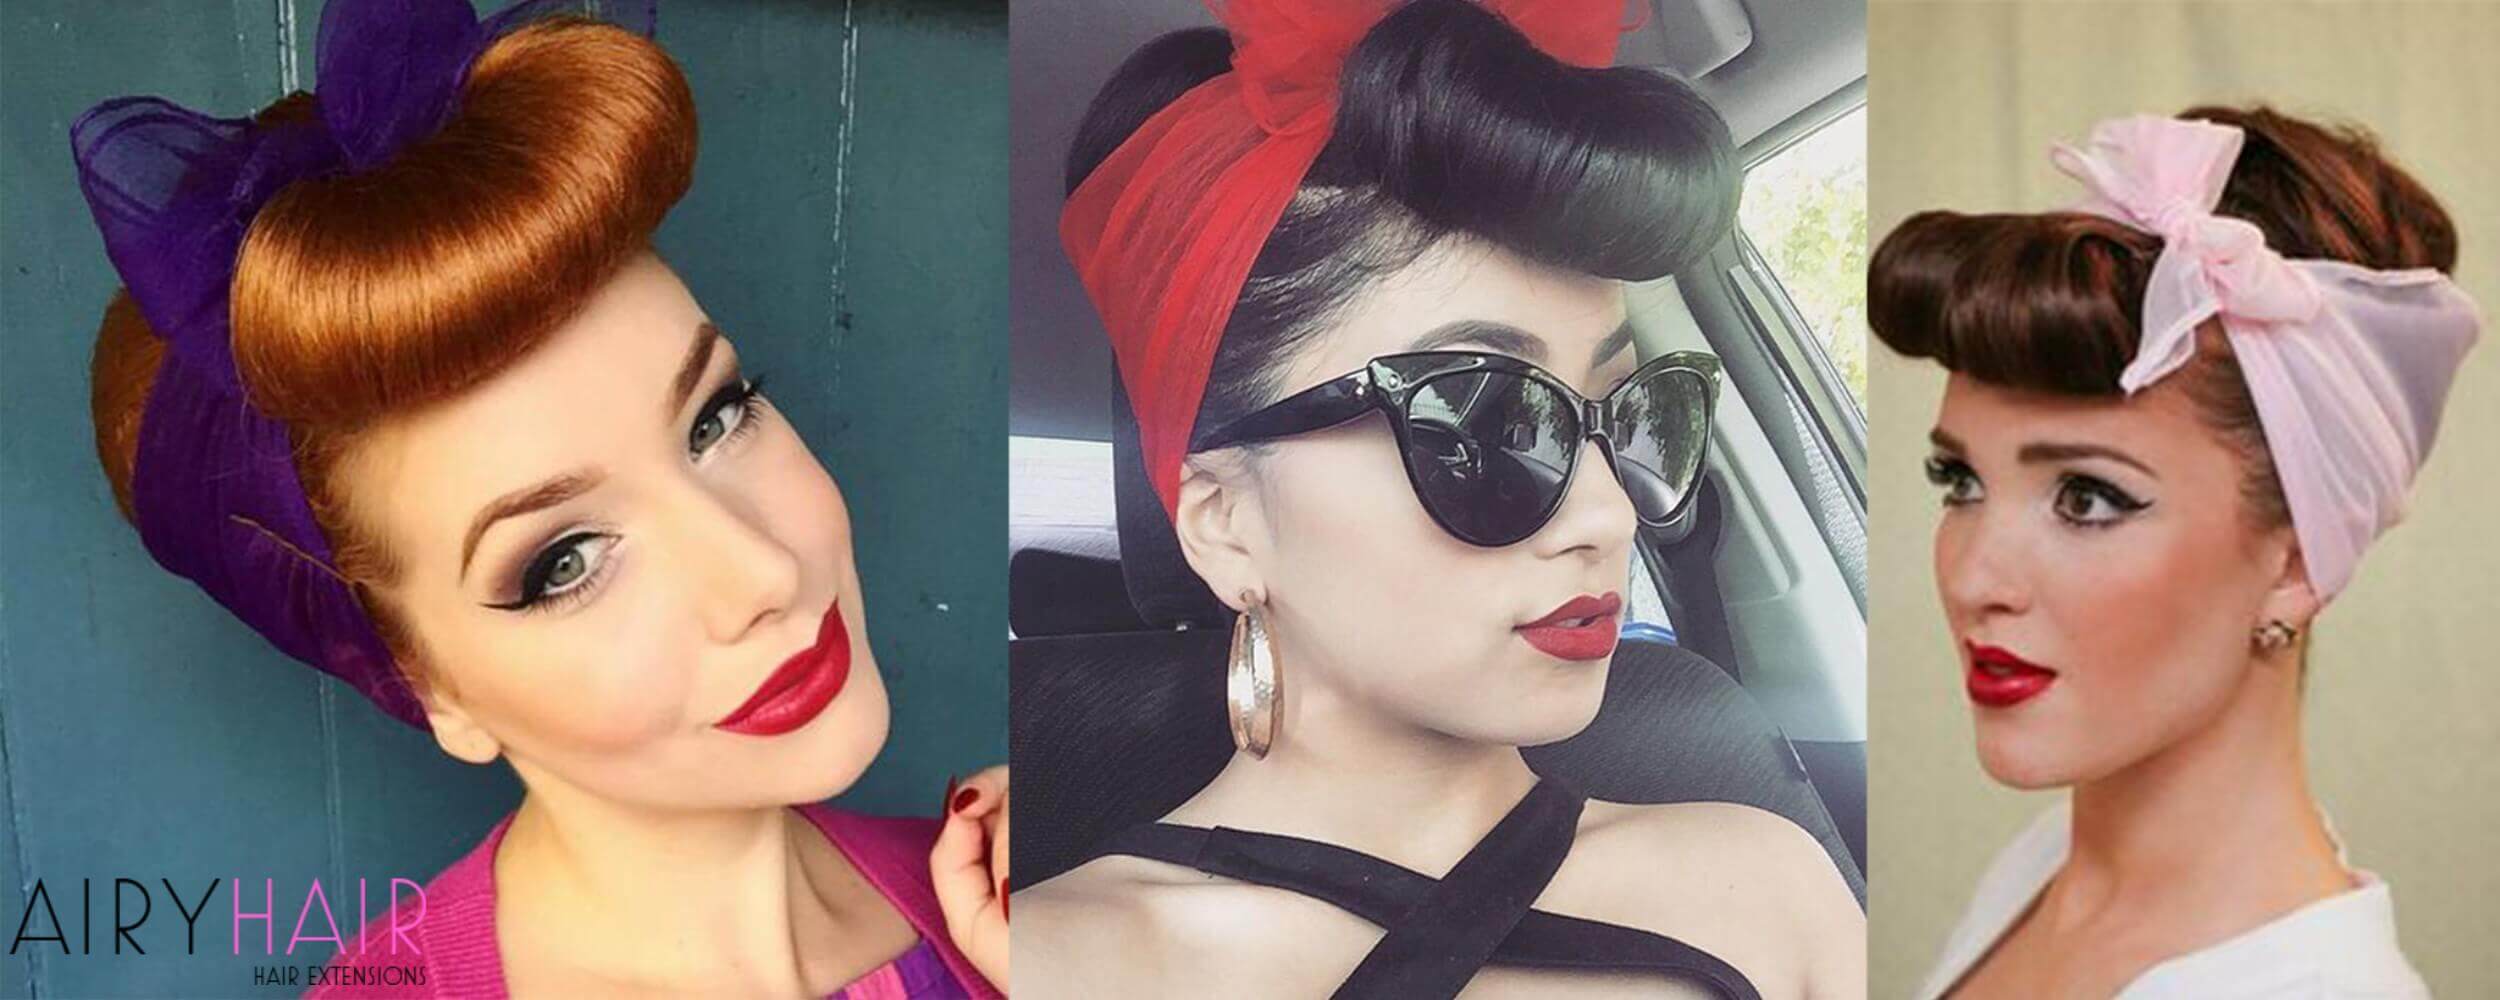 1940s hair that isnt victory rolls! Tbh victory rolls are overrated an... |  TikTok